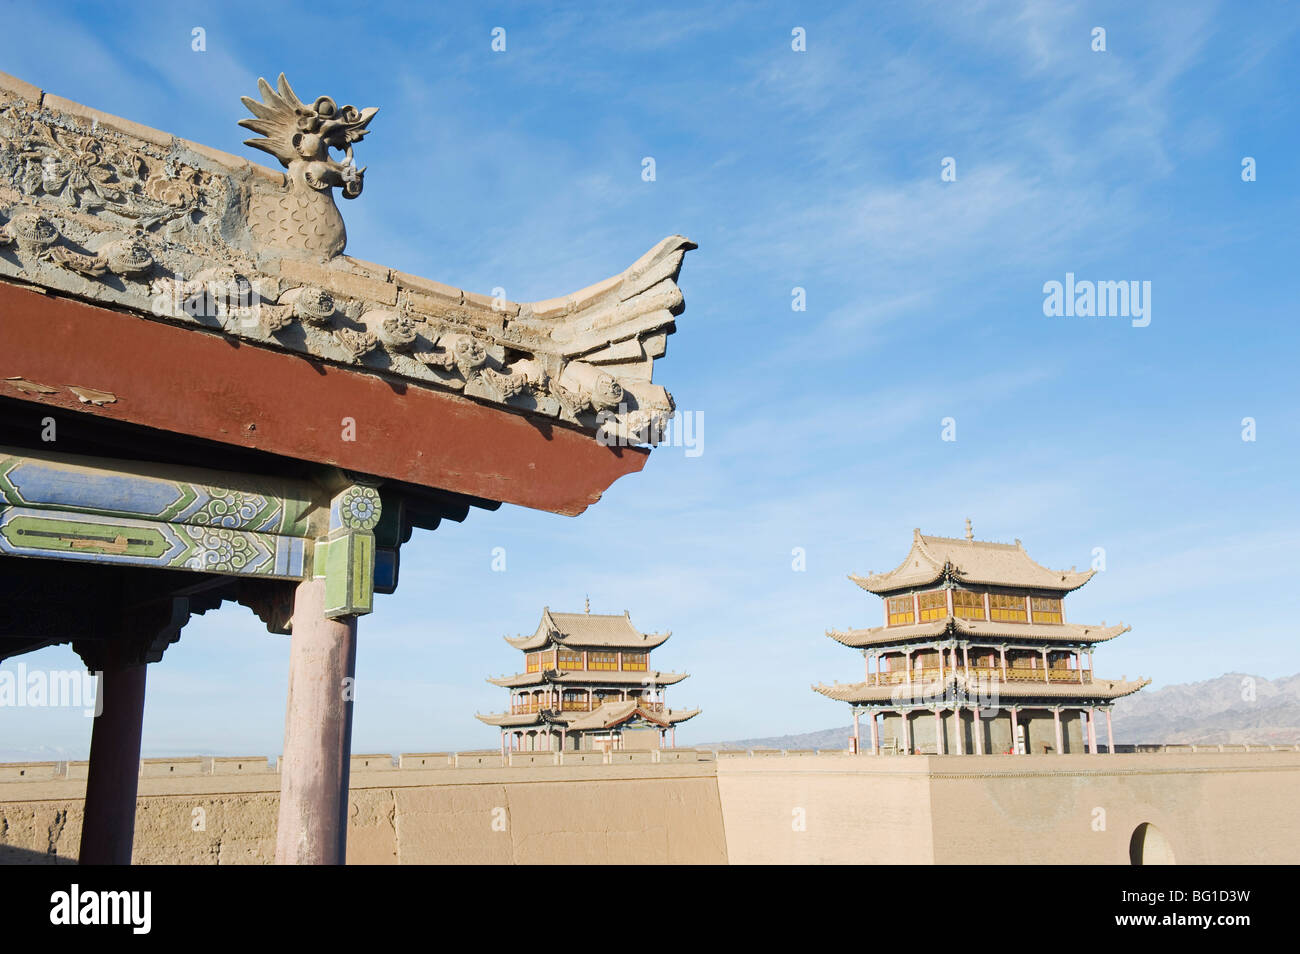 Ming dynasty Jiayuguan Fort dating from 1372 in the Hexi Corridor, Gansu Province, China, Asia Stock Photo